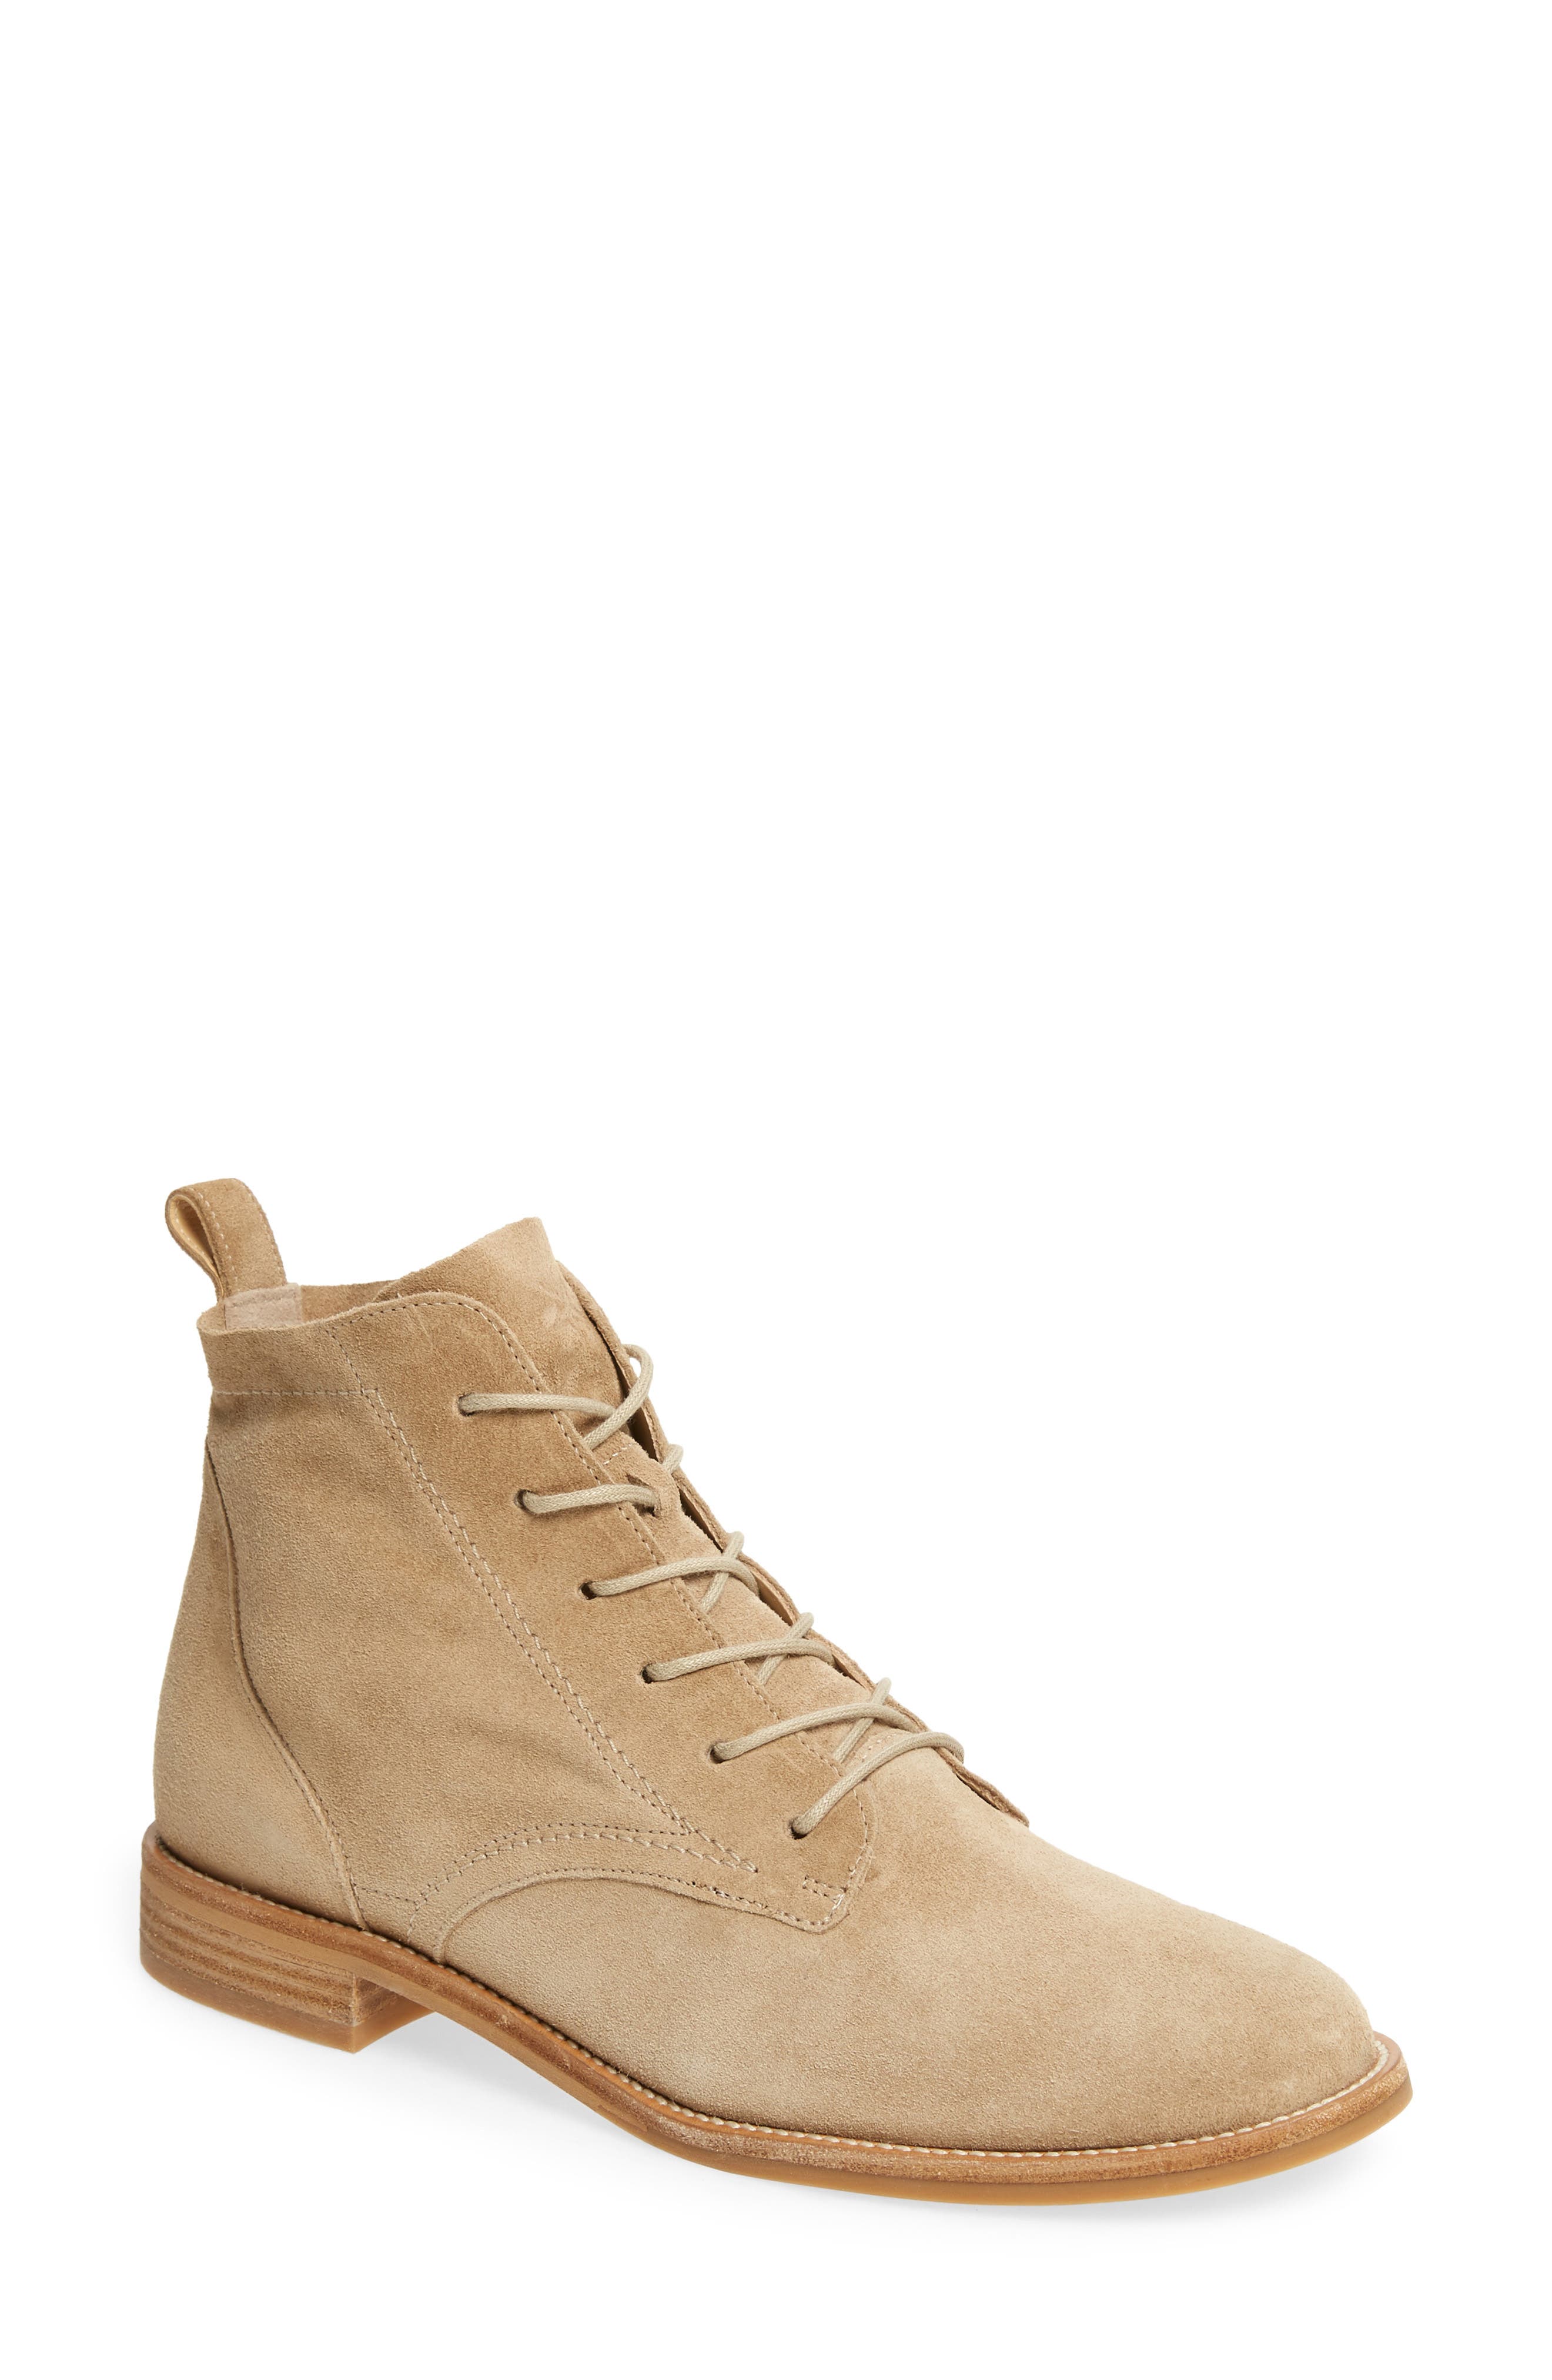 Buy > comfortable ankle boots women > in stock